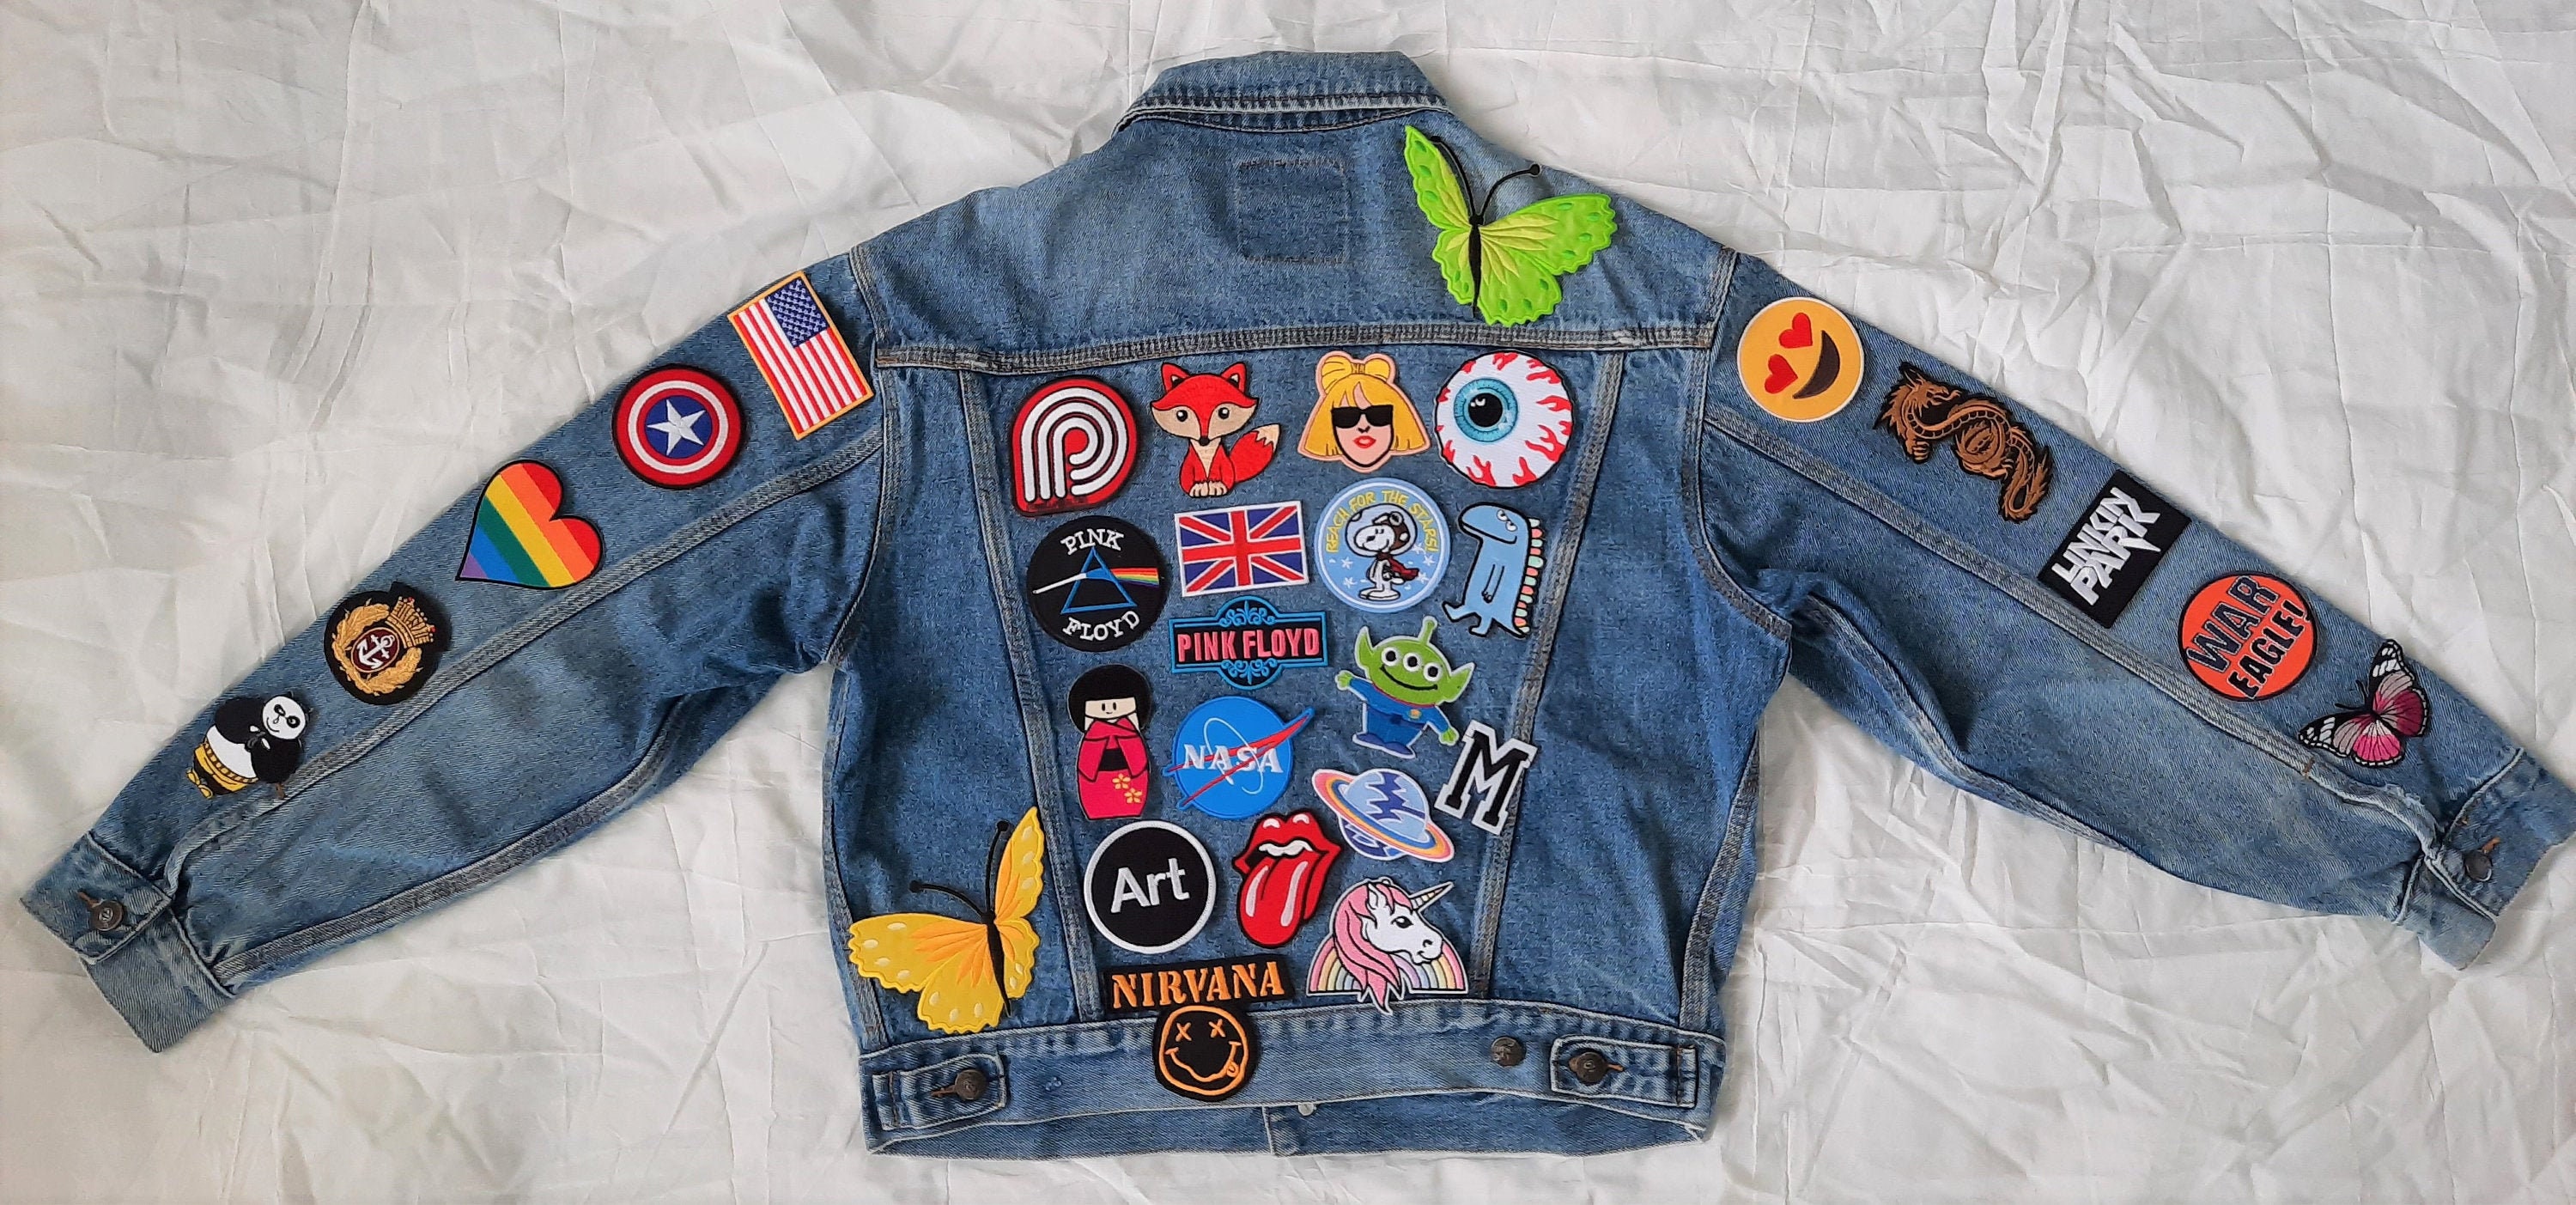 Upcycled Jean Jacket with Patches / Reworked Vintage Jean | Etsy